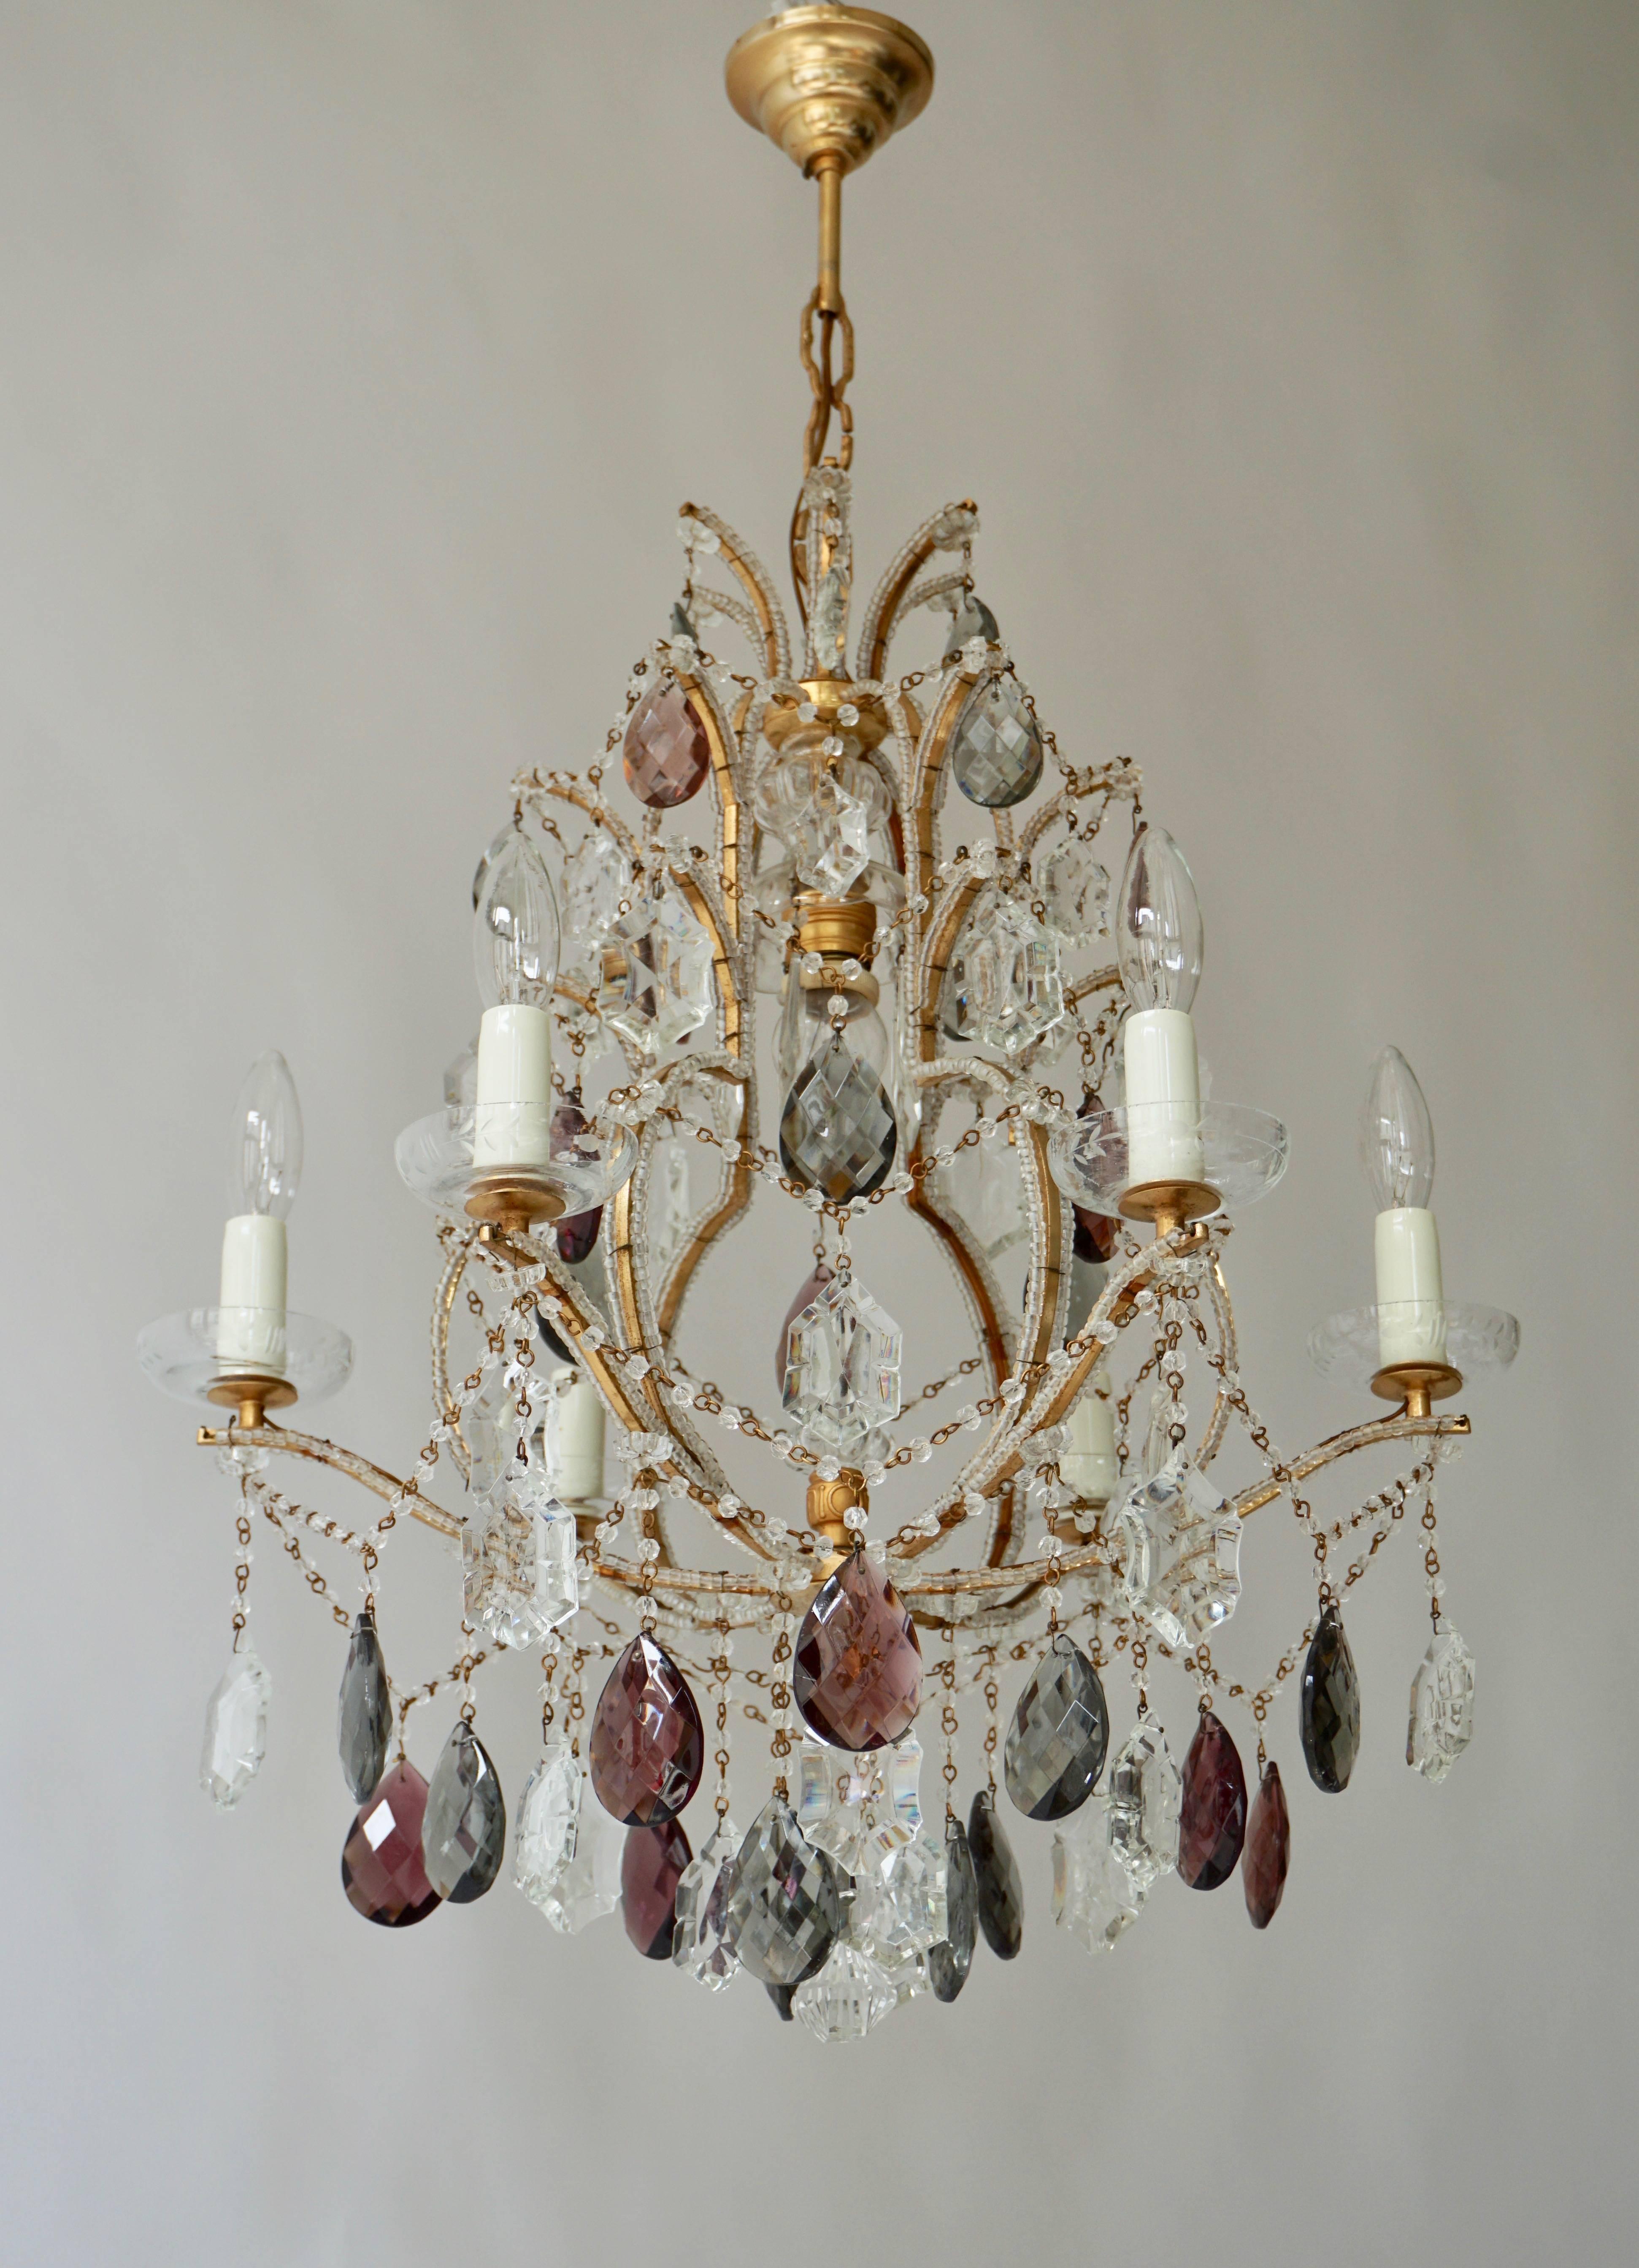 A lovely French iron and rock crystal chandelier with six lights in the manner of Baguès.
Six E14 bulbs and one E27 bulb.
Measures: Diameter 54 cm.
Height fixture 60 cm.
Total height with the chain 85 cm.